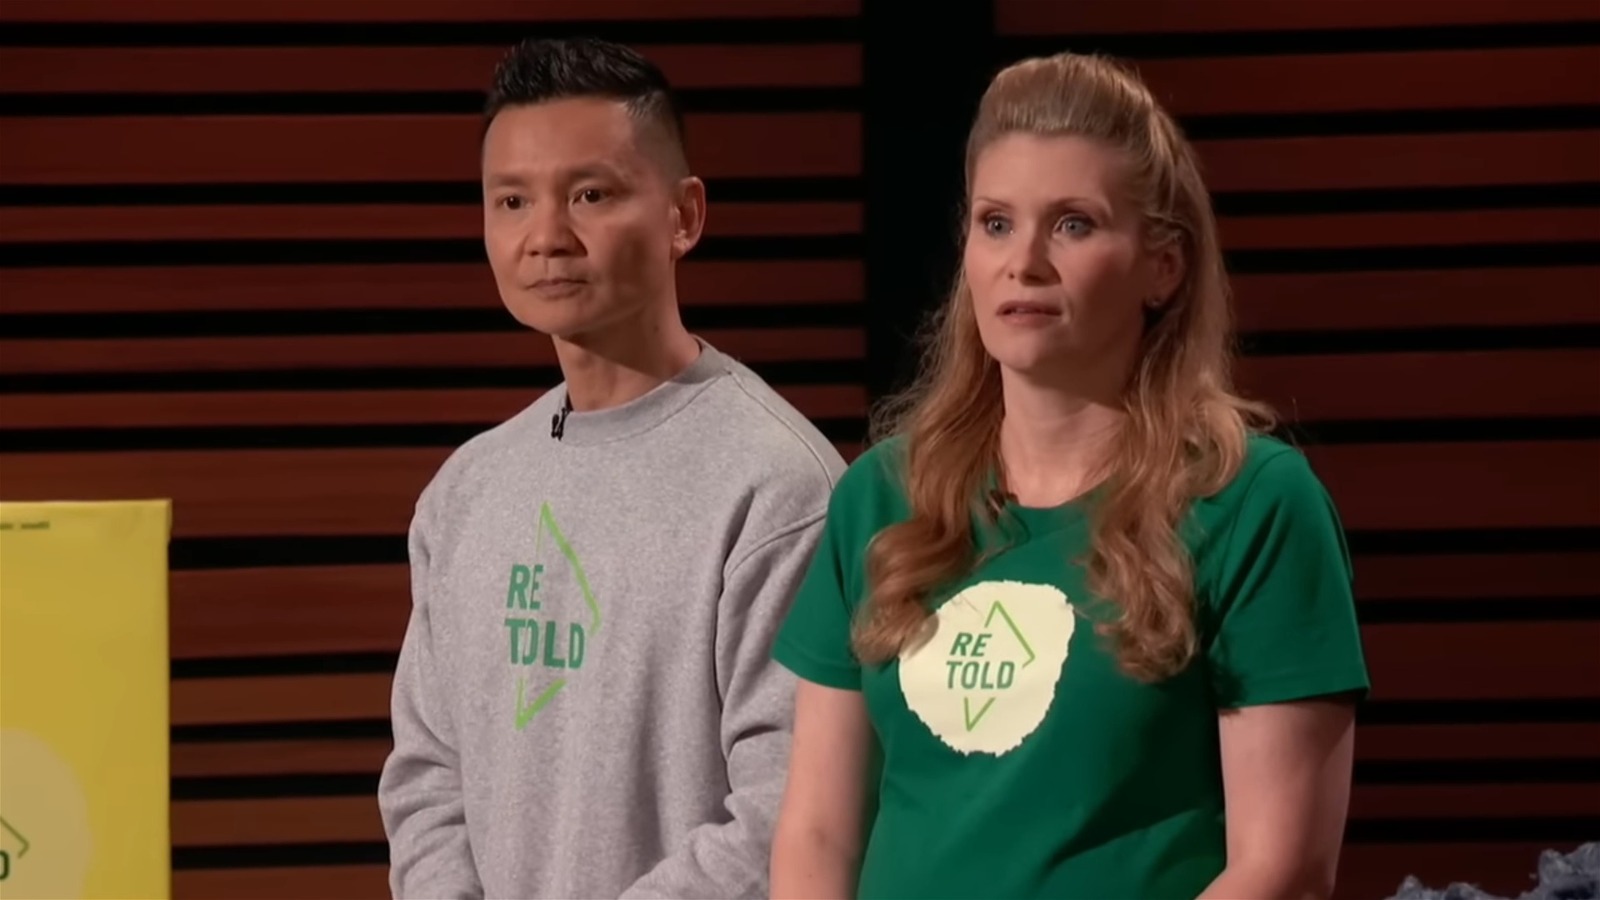 Retold Recycling on 'Shark Tank' Makes Textile Recycling Accessible